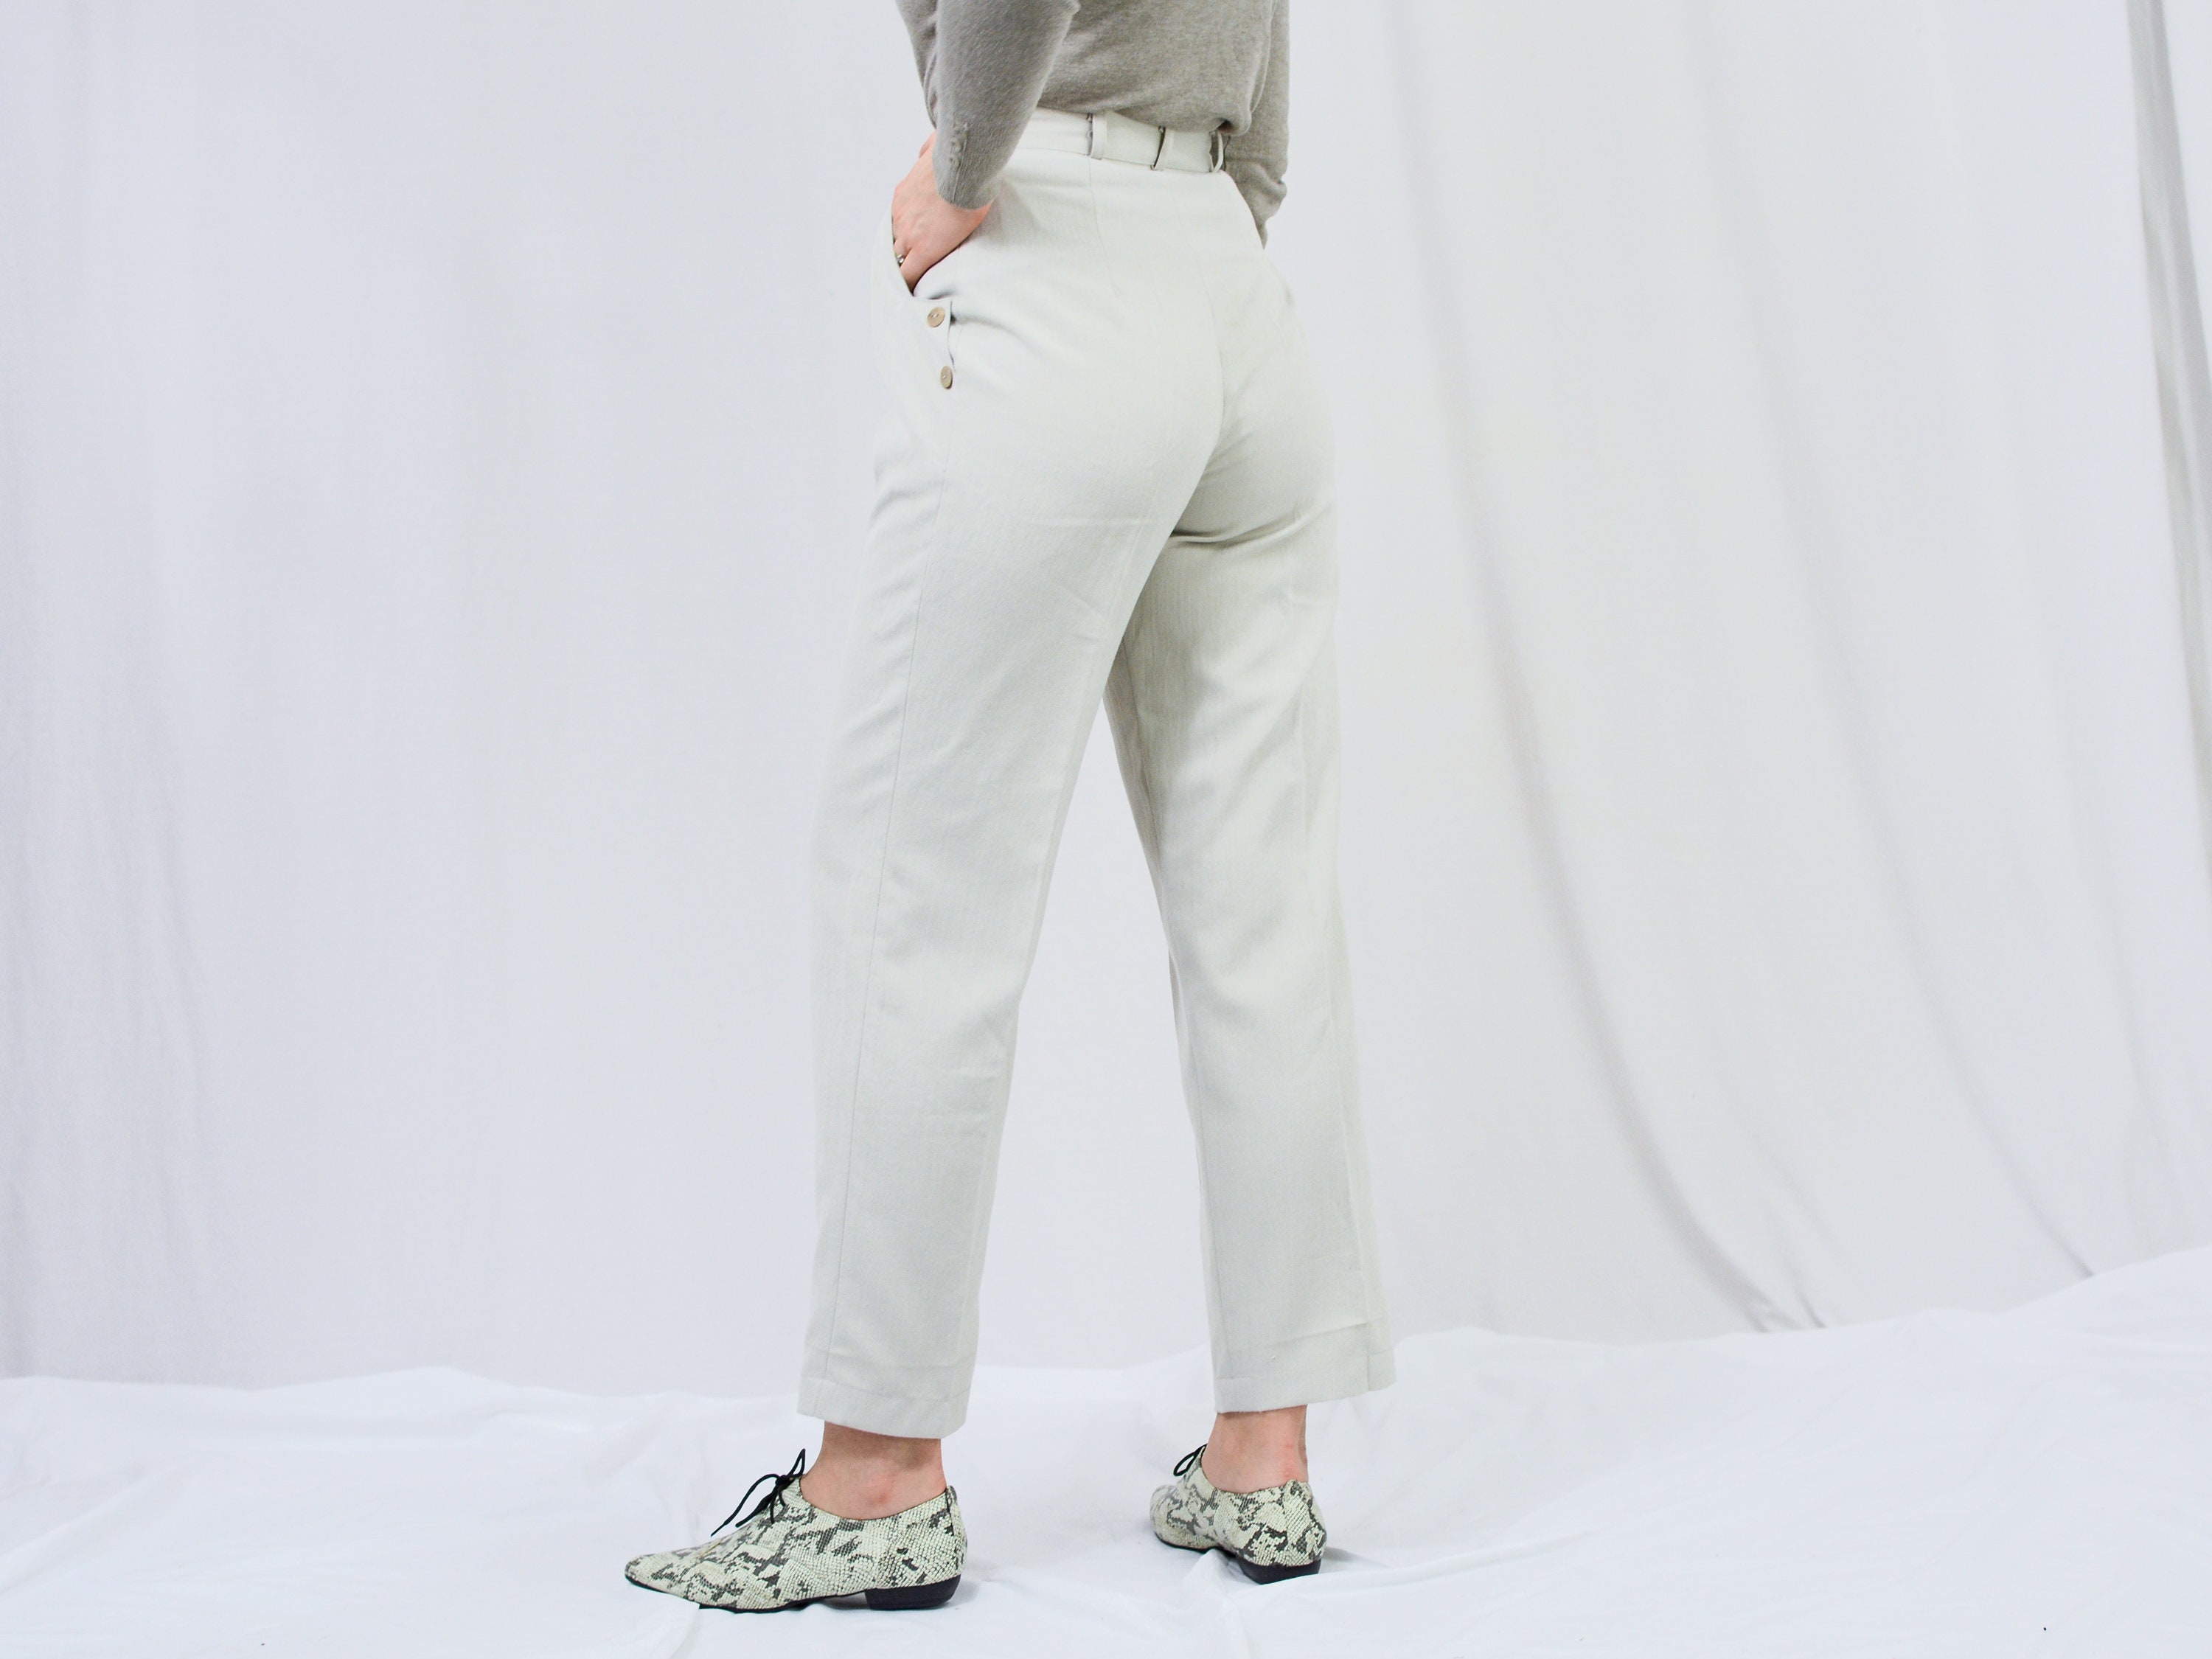 Cream Pleated Pants W27 L28 Tapered Leg Relaxed Fit Super High - Etsy